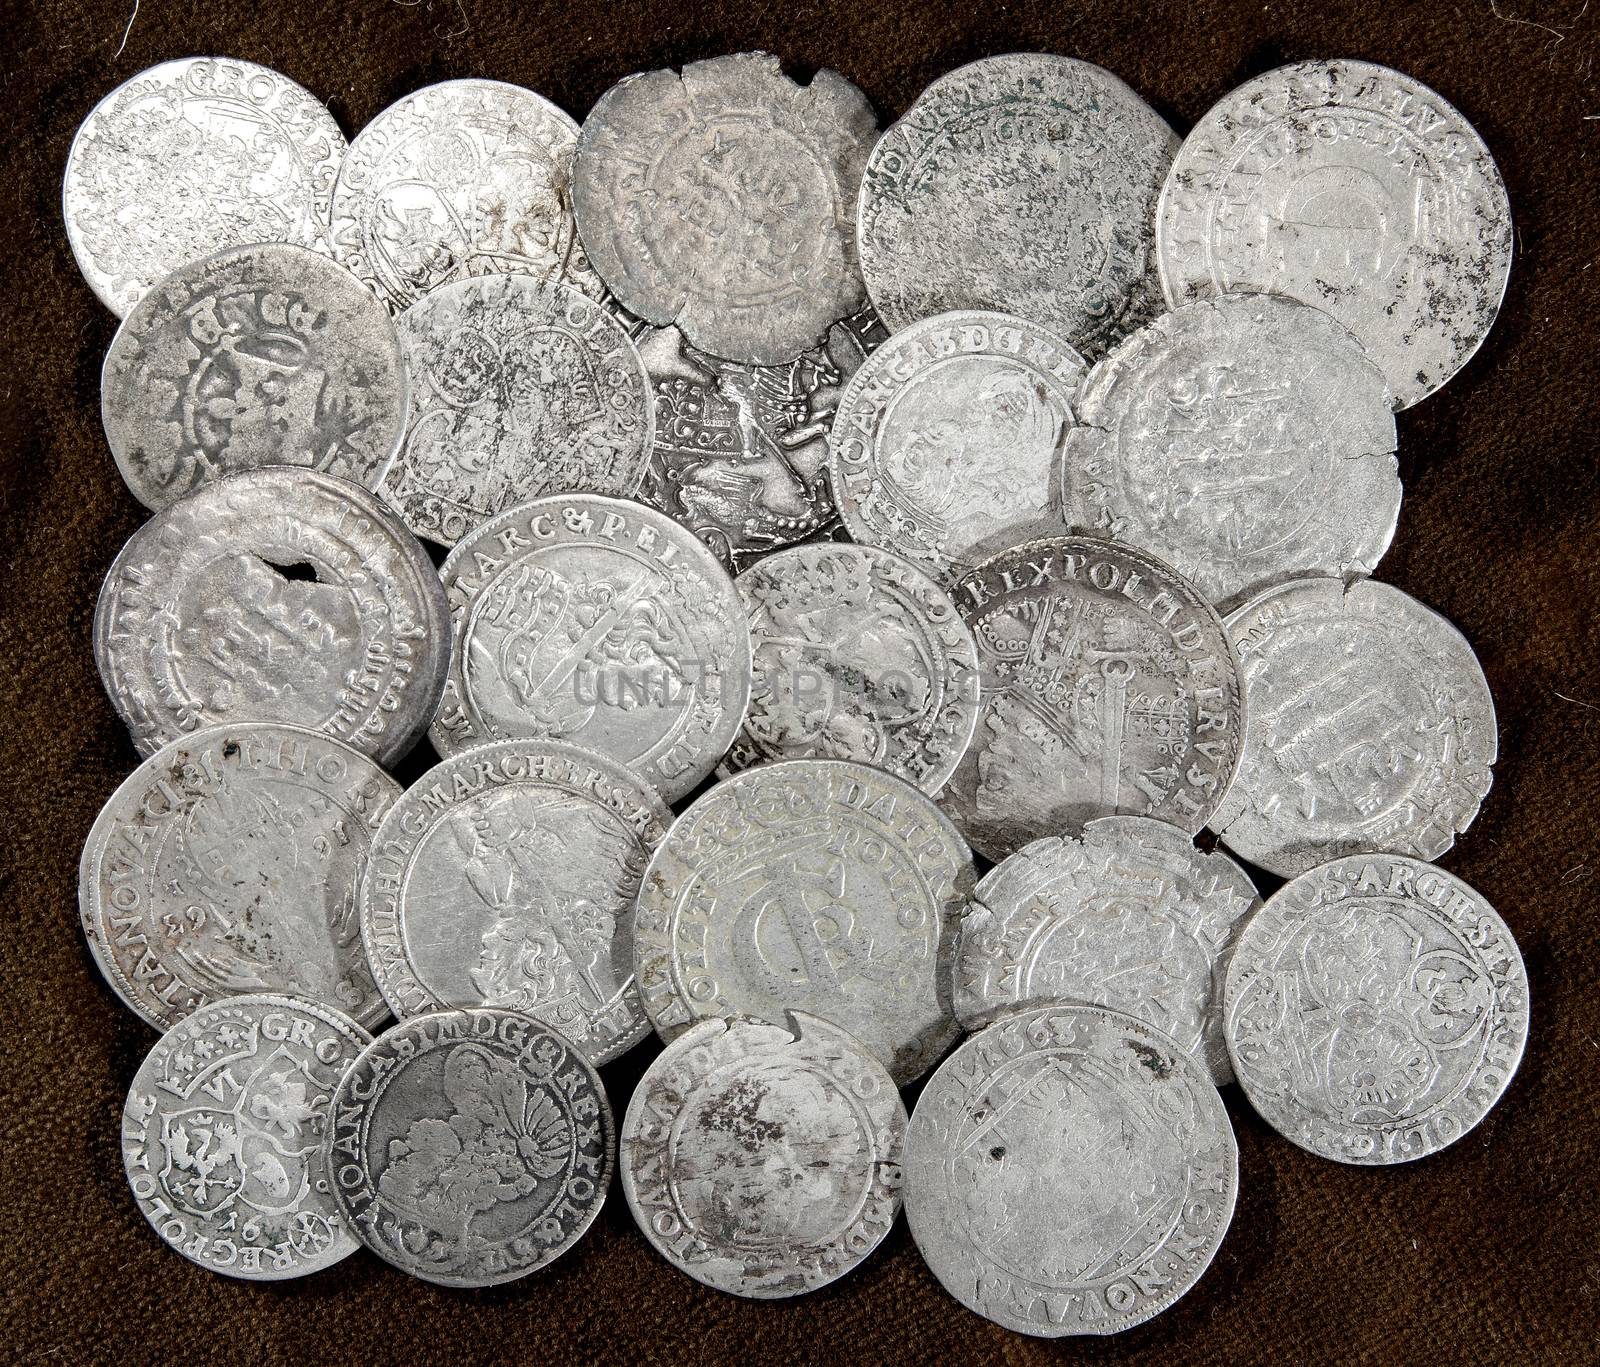 The old silver coins. There may be collectible